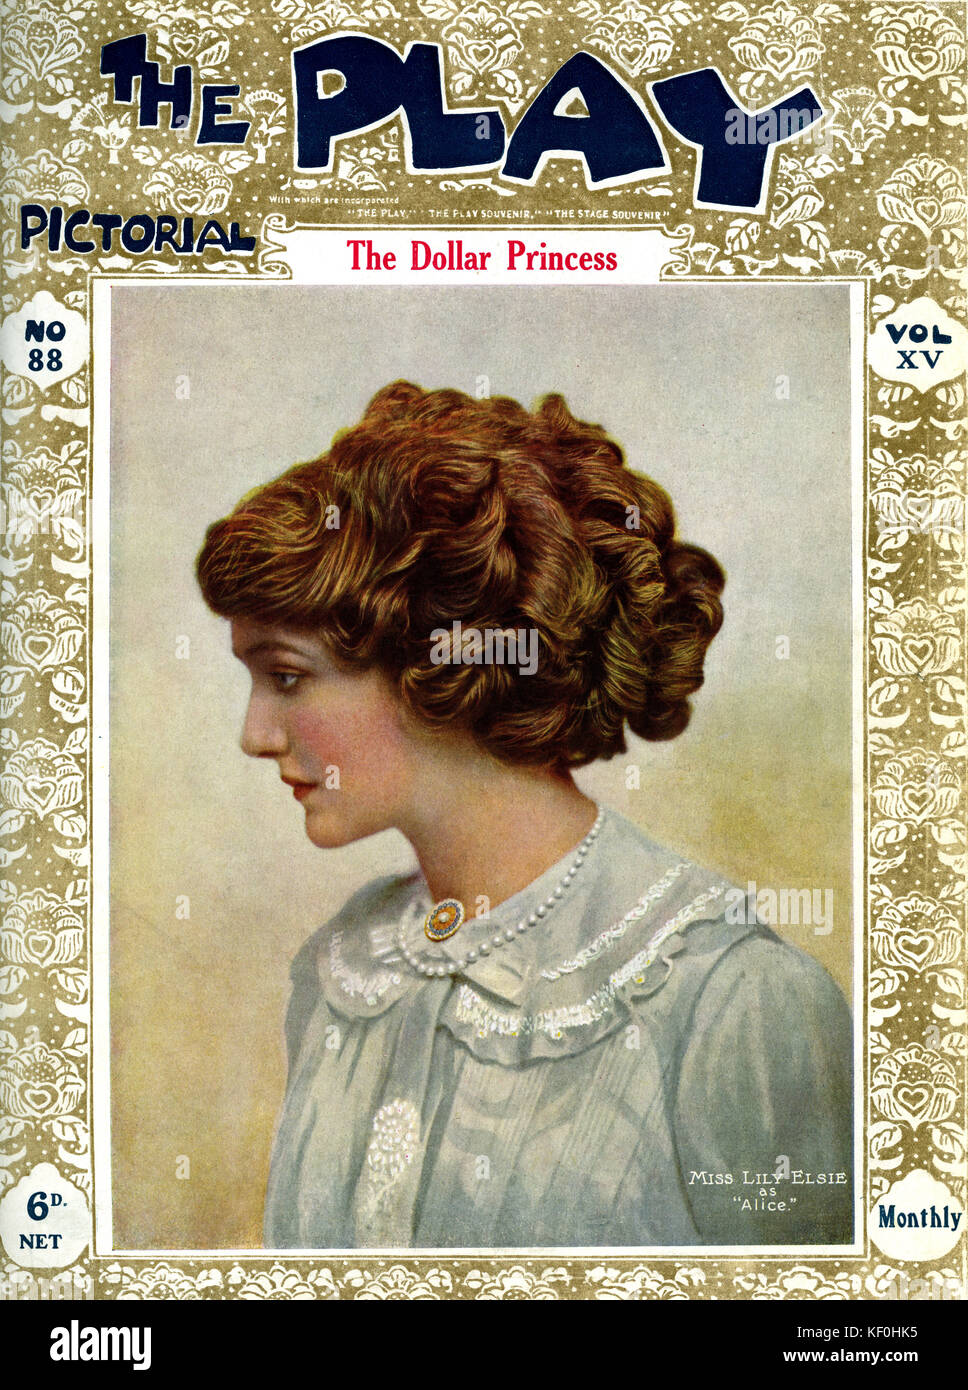 'The Dollar Princess' by A. M. Willner and Fritz Grunbaum, music be Leo Fall. With Lily Elsie as Alice (8 April 1886 - 16 December 1962), at Daly's Theatre, London, 25 September 1909. Cover of Play Pictorial, 1909. Stock Photo